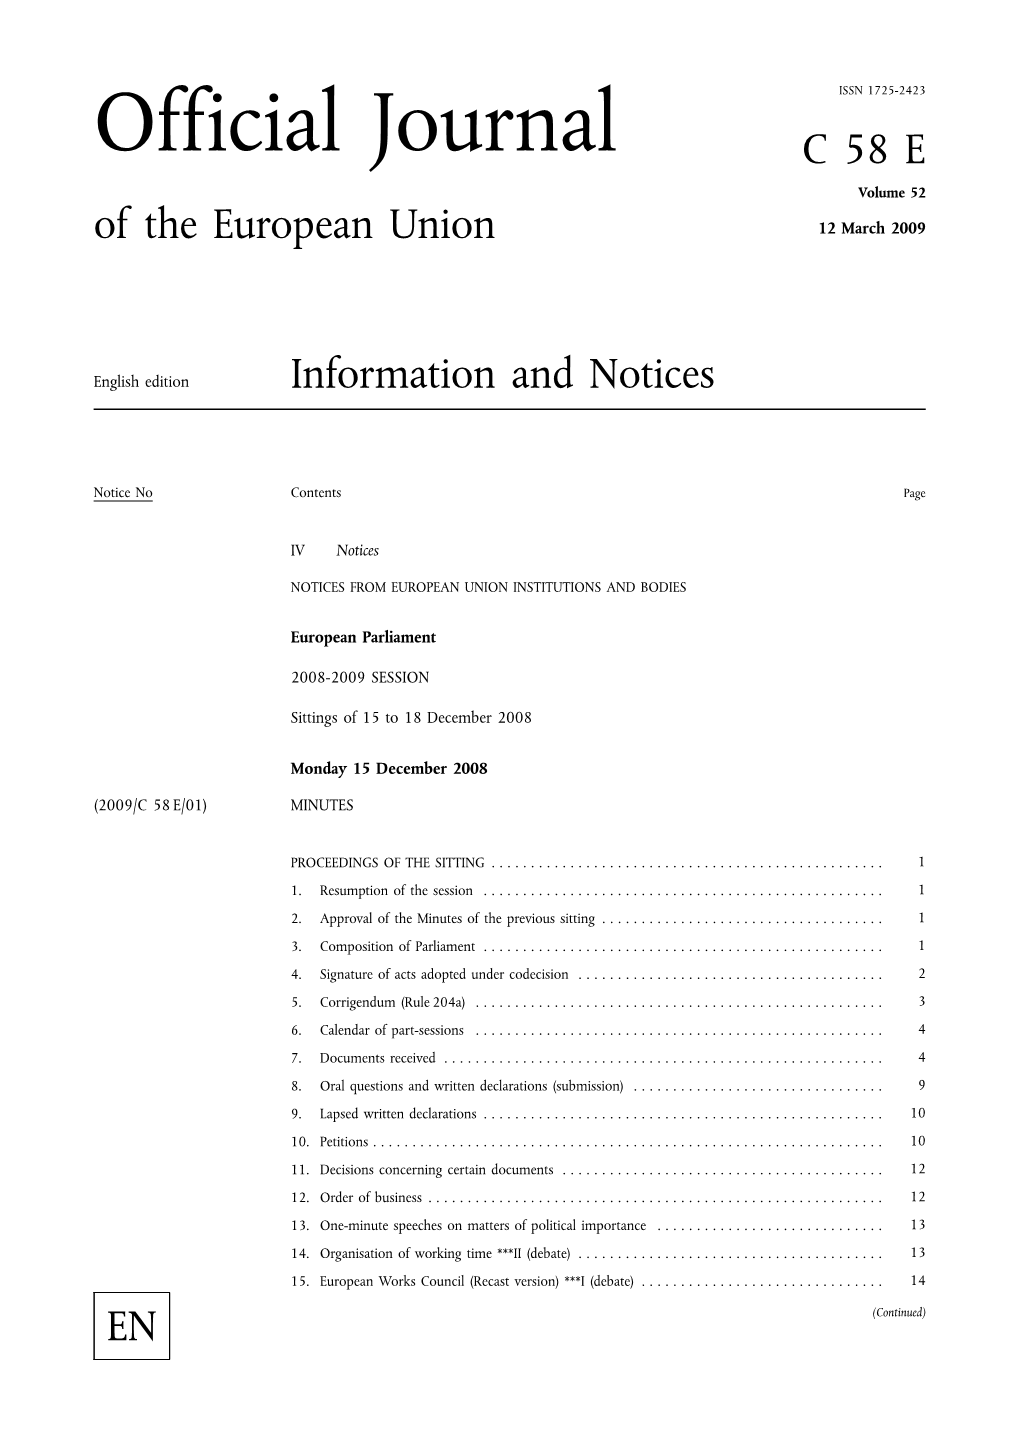 Official Journal C58E Volume 52 of the European Union 12 March 2009